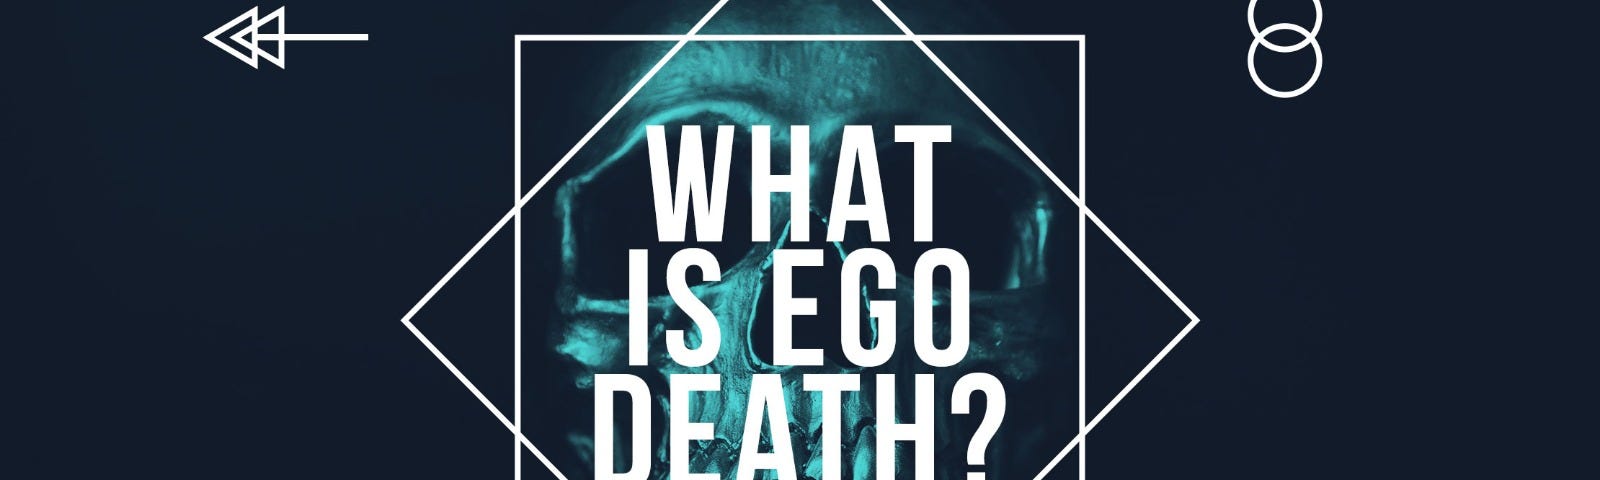 what is ego death by BlueGoba.co